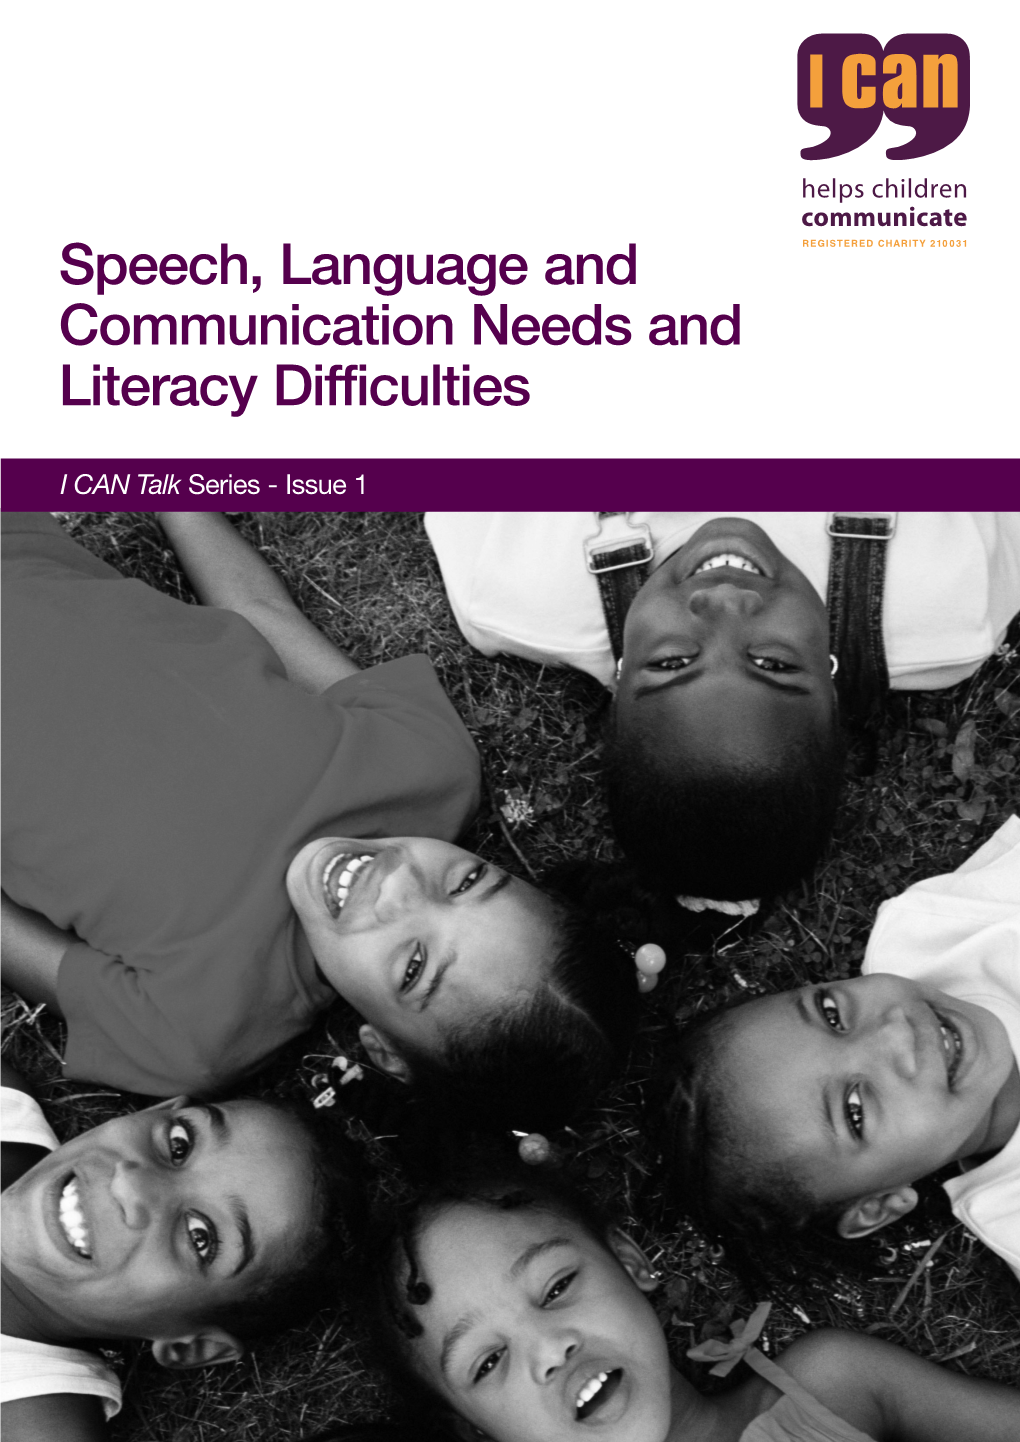 Speech, Language and Communication Needs and Literacy Difficulties